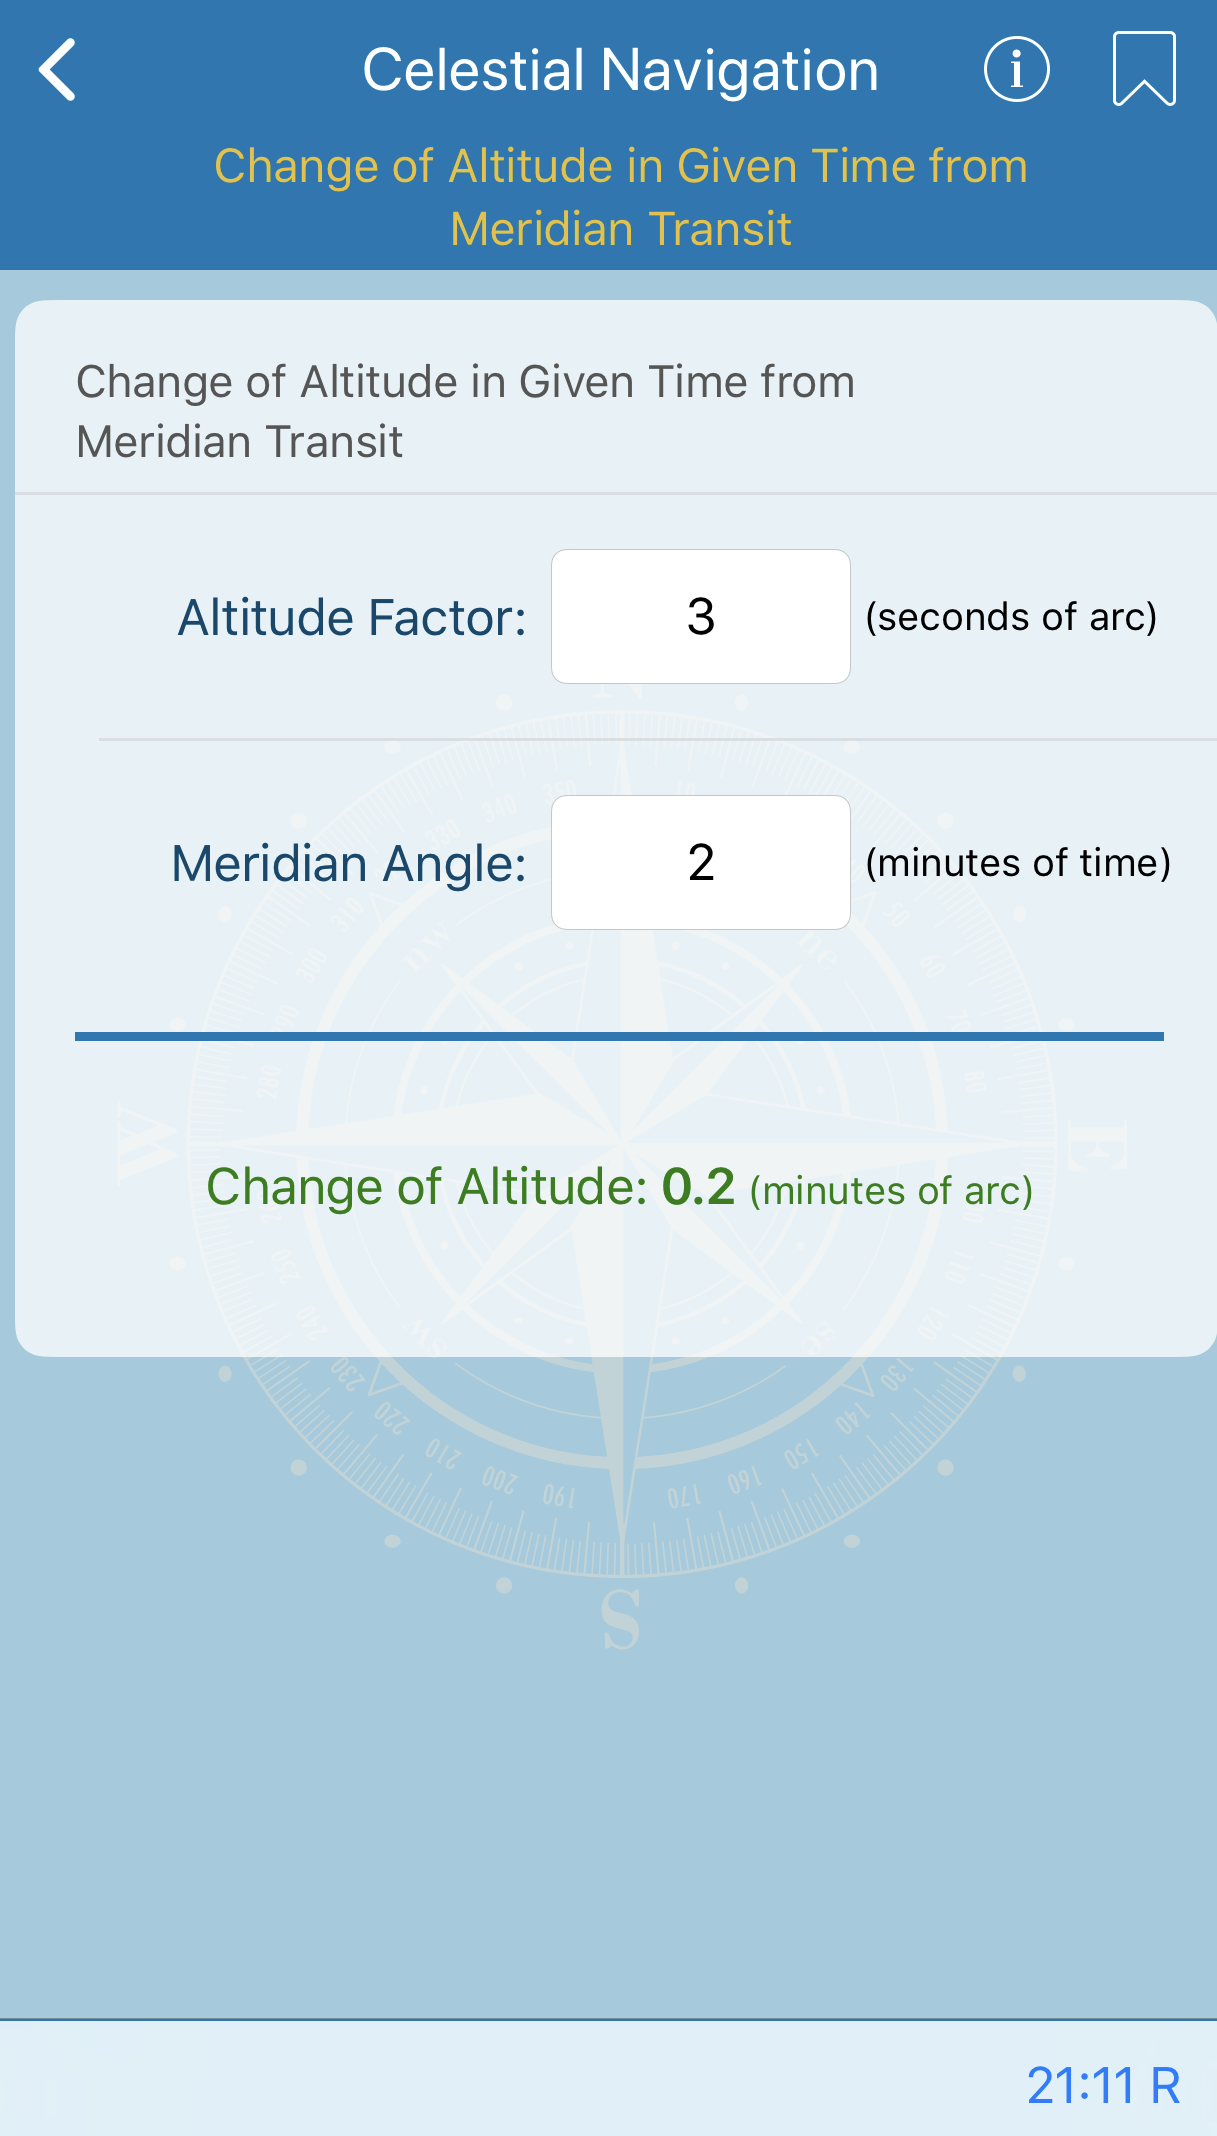 Change of Altitude in Given Time from Meridian Transit